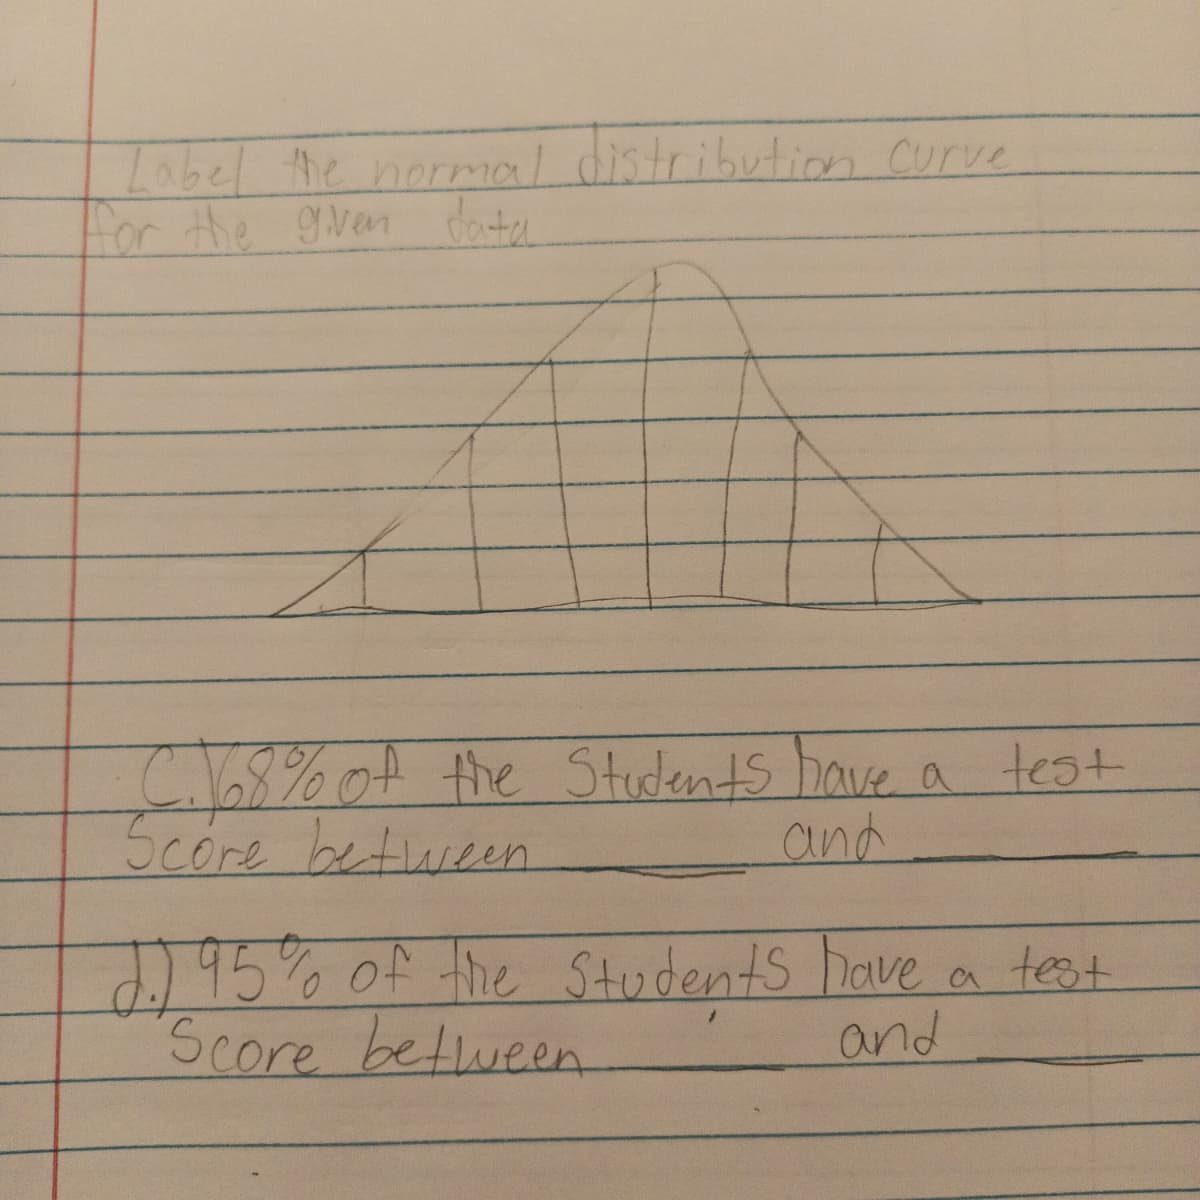 Label the normal distribution curve
for the given data
x
C. 68% of the Students have a test
Score between
and
d.) 95% of the Students have a test
Score between
and